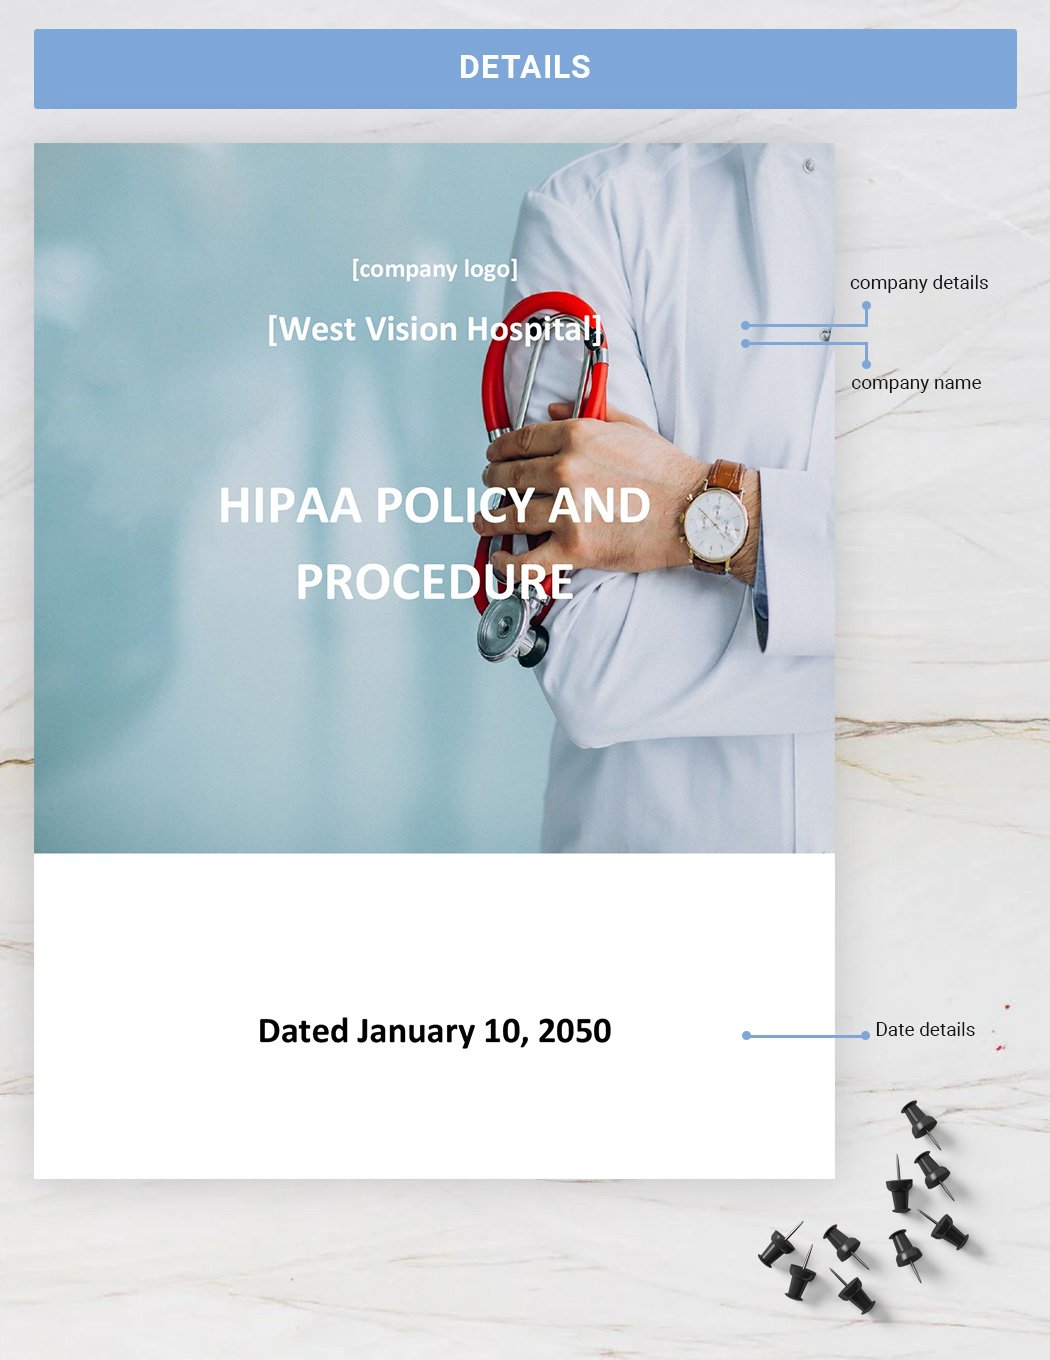 HIPAA Policy and Procedure Download in Word, Google Docs, Apple Pages